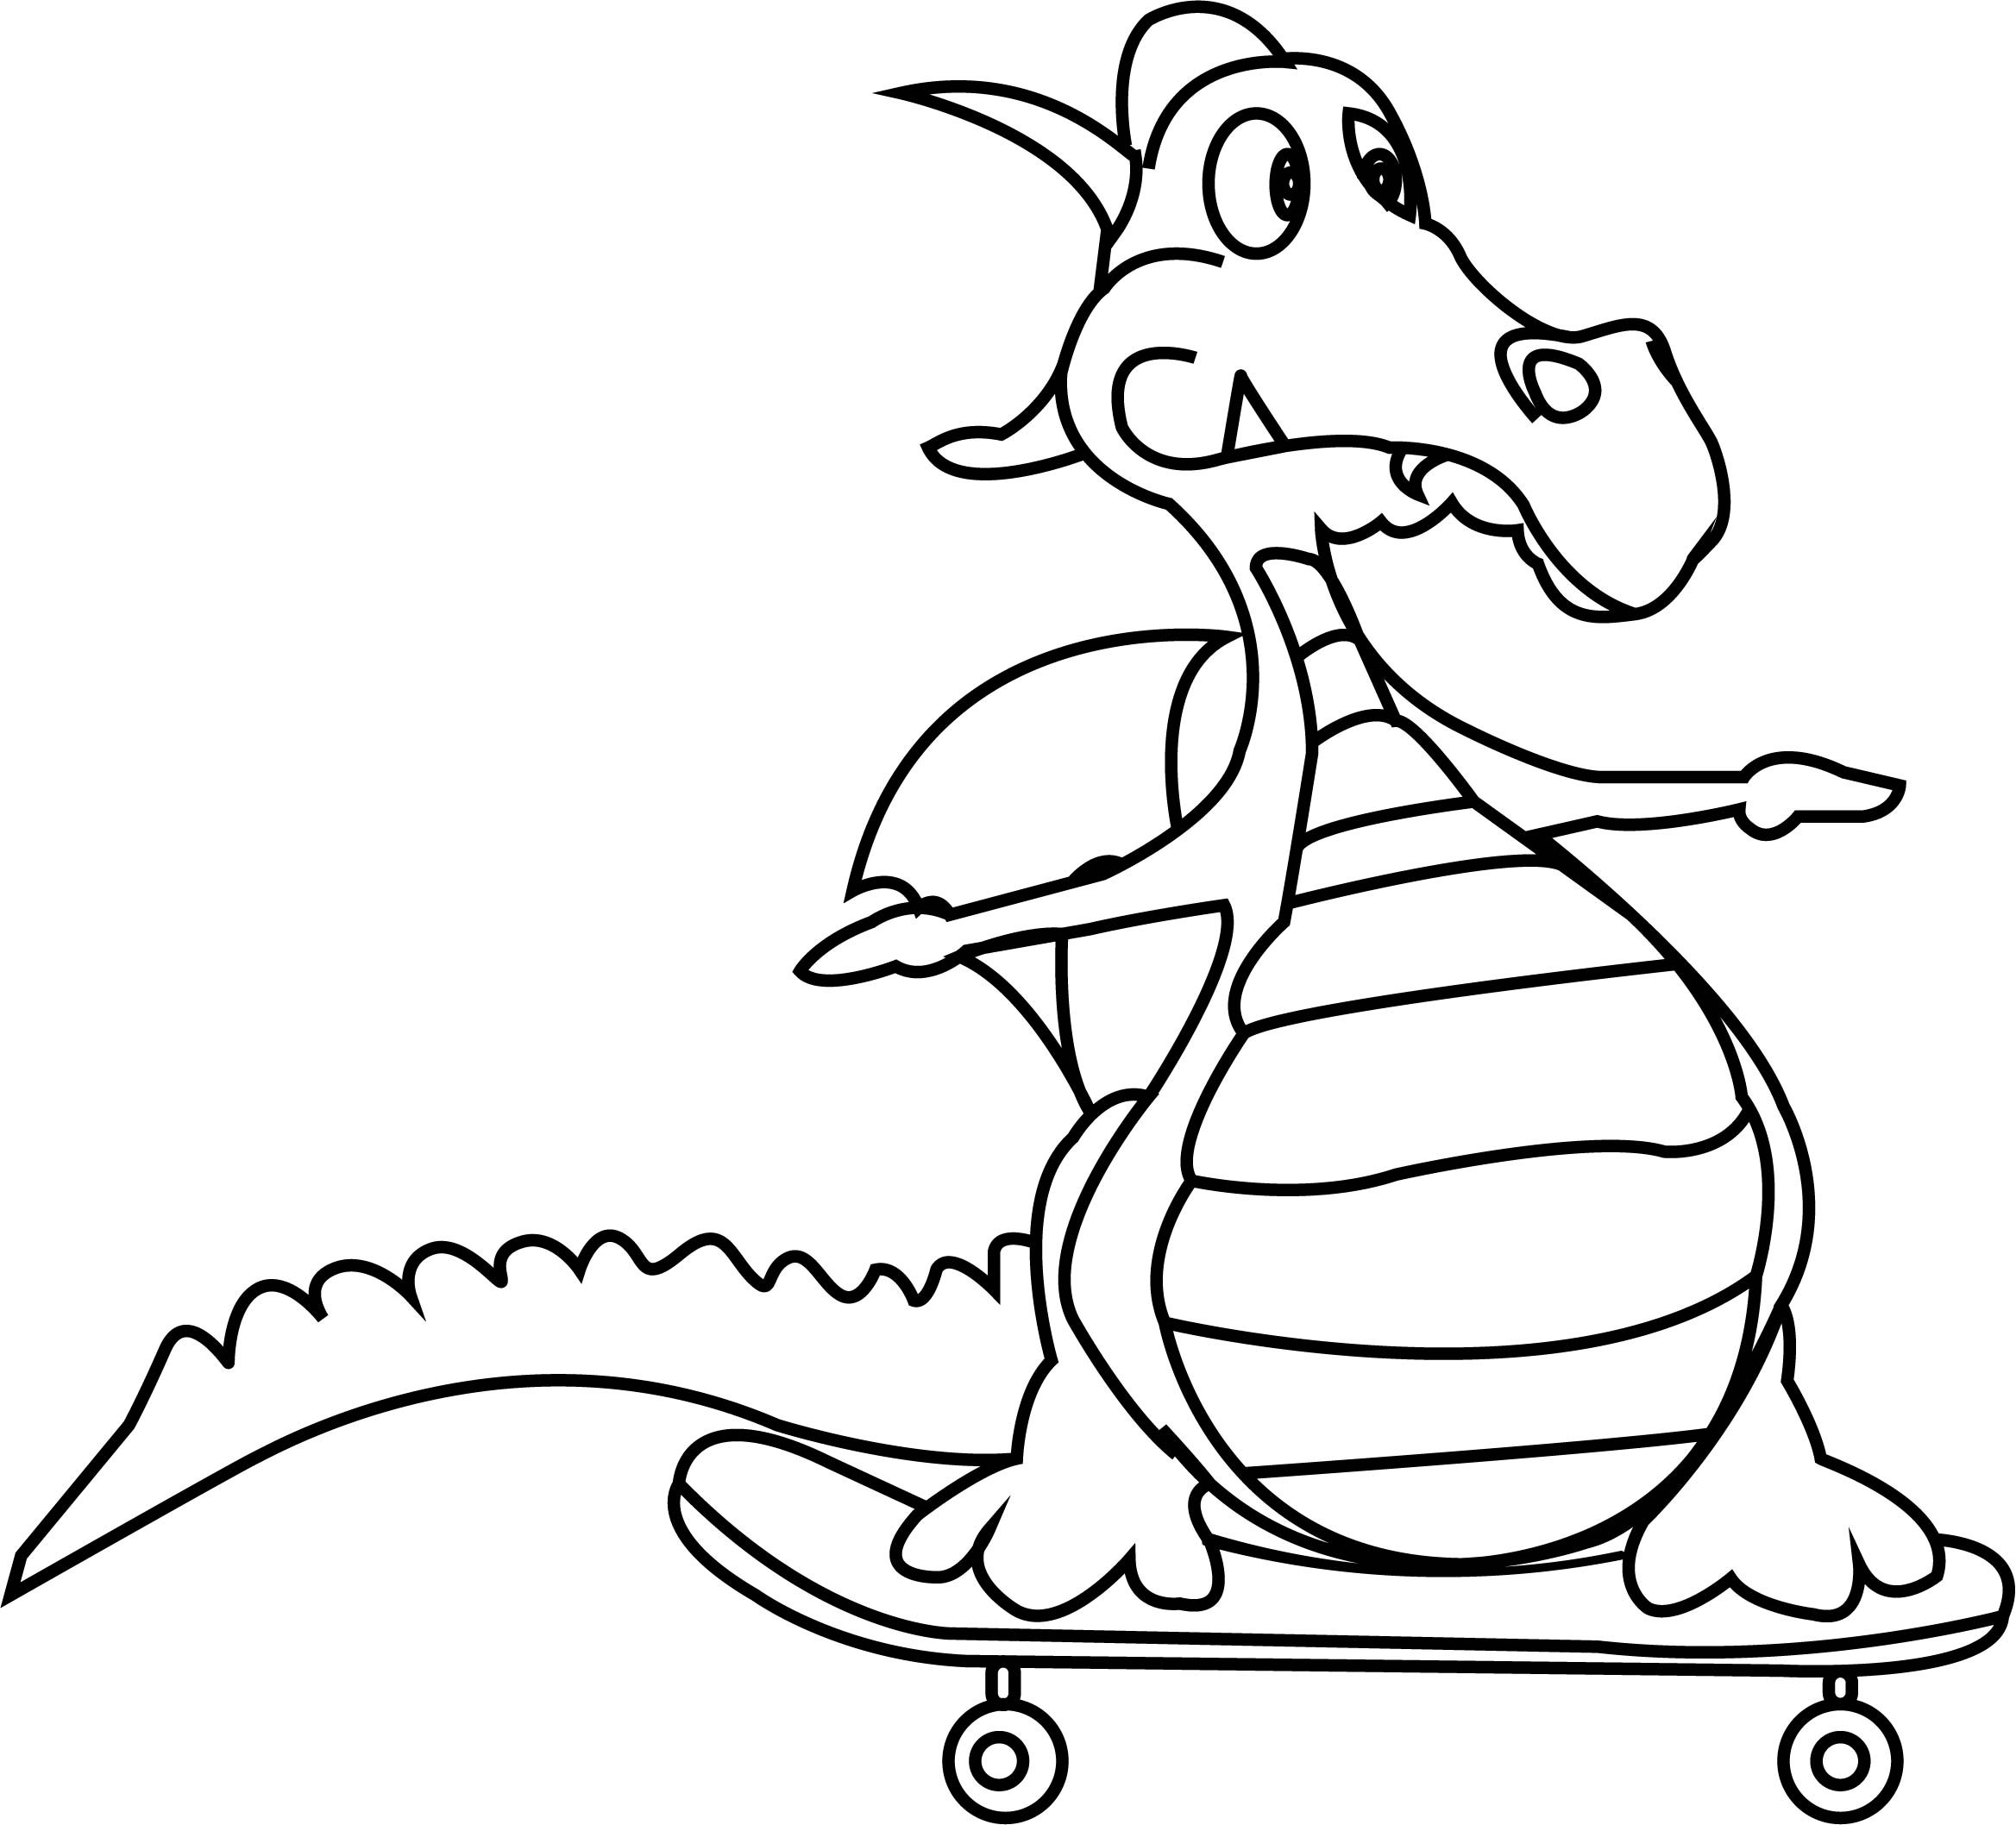 Awesome Coloring Pages For Kids
 Free Printable Funny Coloring Pages For Kids